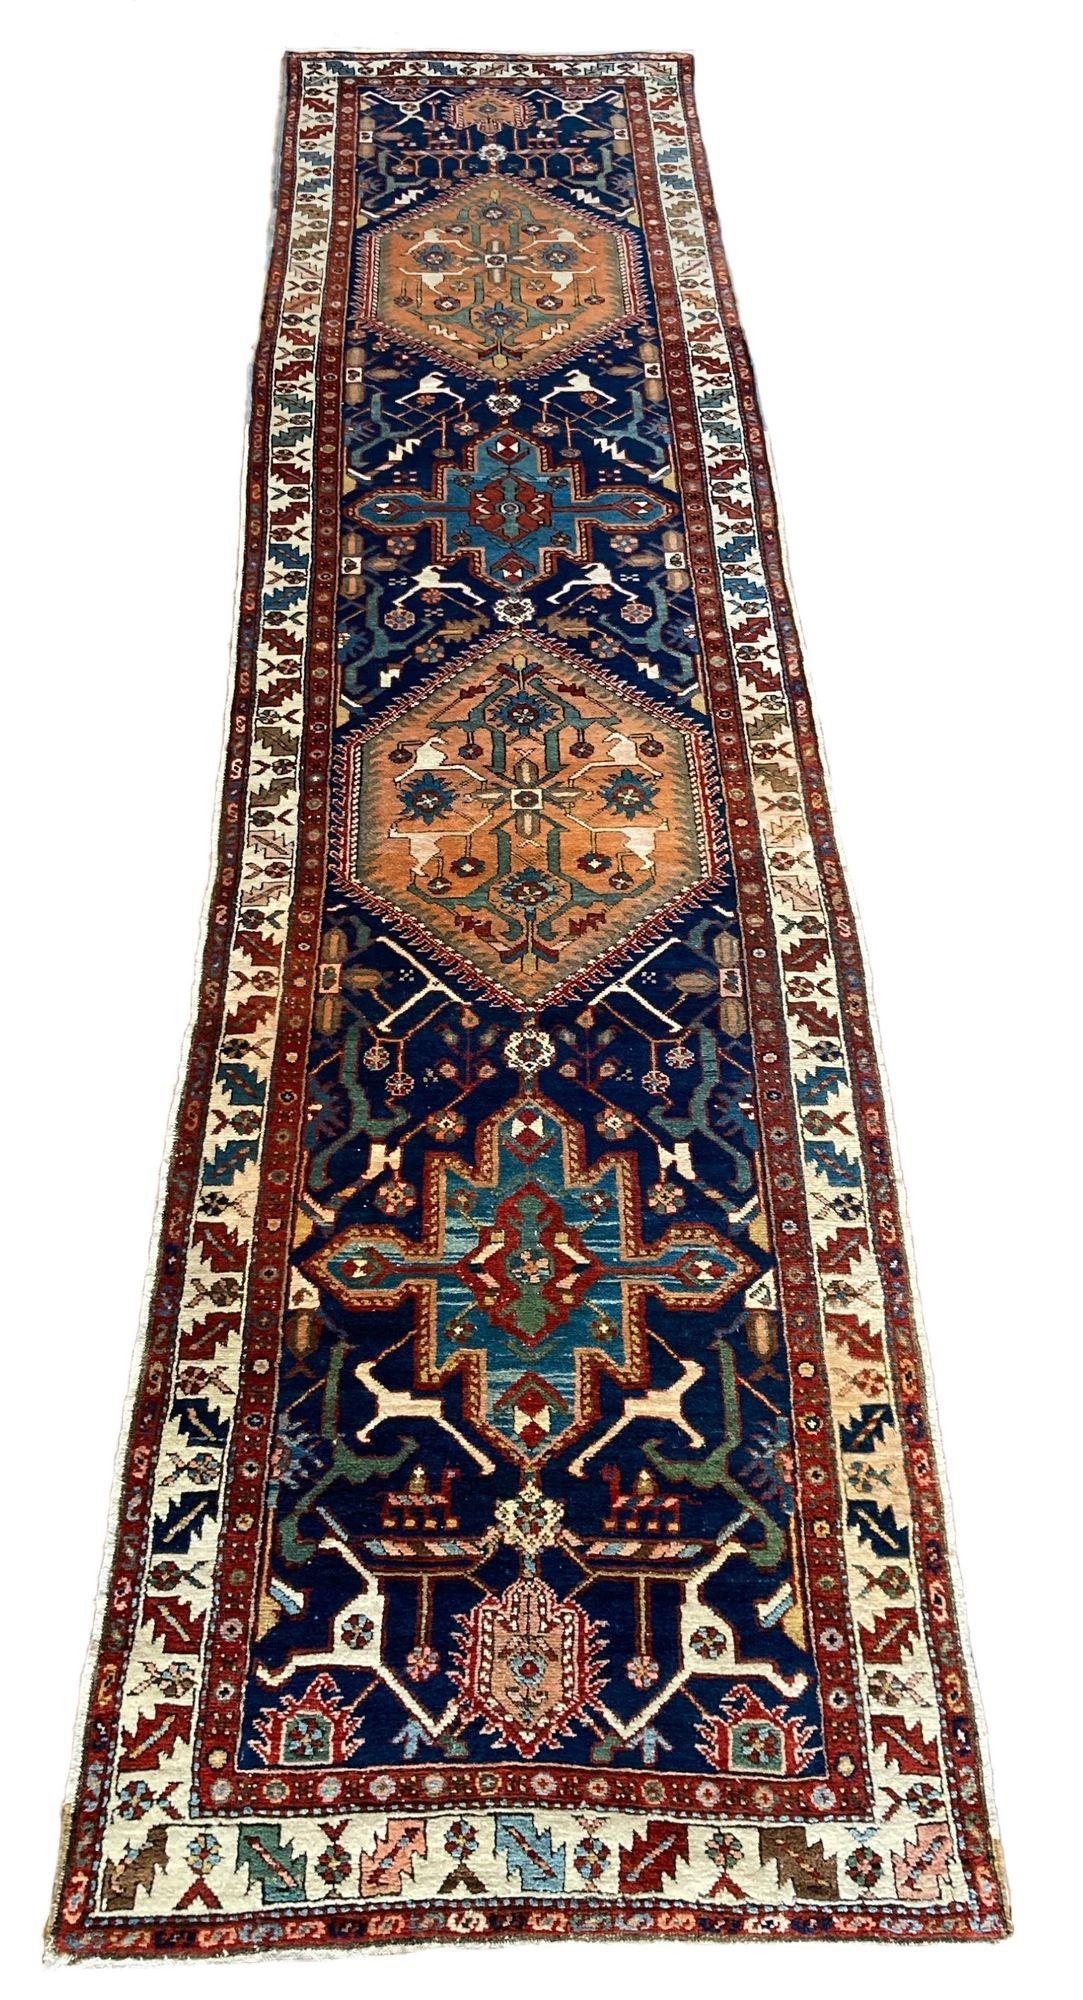 A lovely antique Heriz runner, handwoven circa 1900 with a geometrical design on a dark indigo field and ivory border. Full of rustic charm and great secondary colours. Note the interesting figures in the detail.
 
Size: 4.35m x 1.04m (14ft 3in x